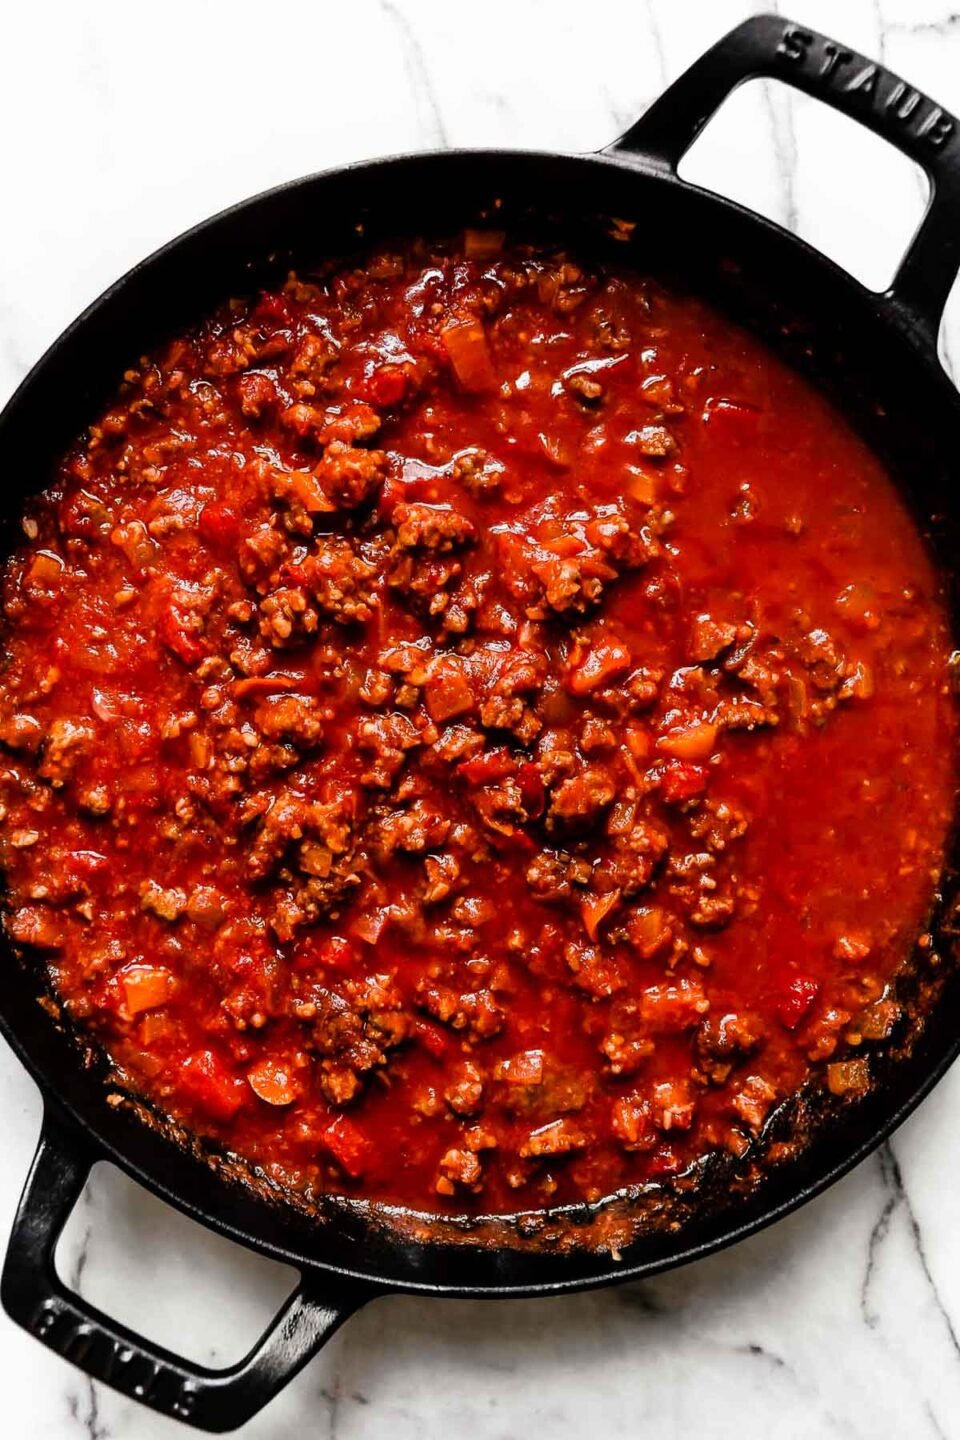 Italian sausage and peppers tomato sauce fills a large black Staub double handled skillet. The skillet sits atop a white and gray marble surface.